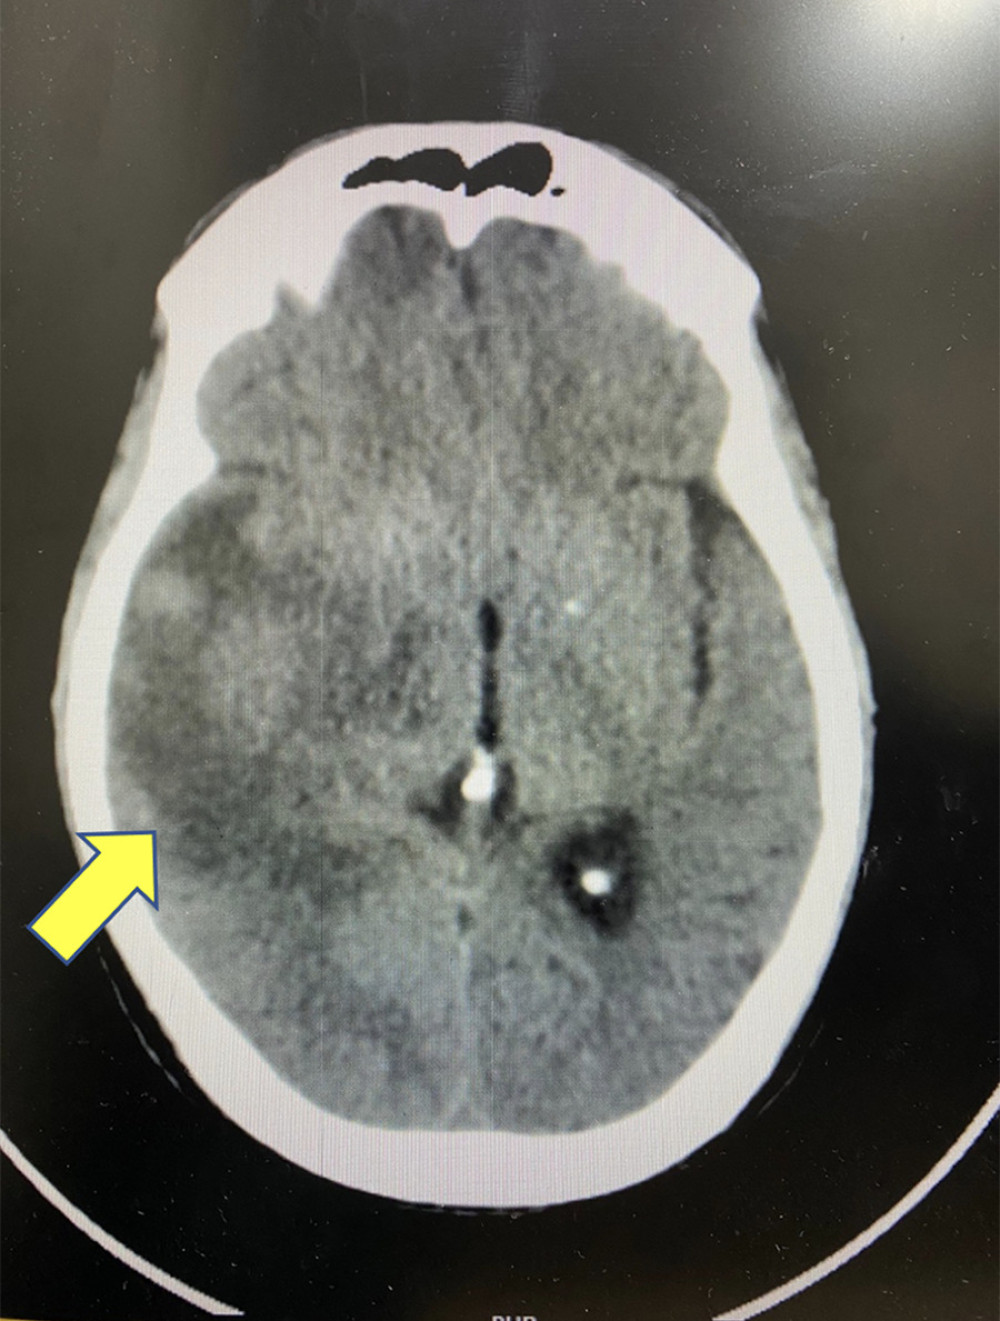 Brain CT scan report. The yellow arrow points to a right temporal lobe lesion. CT – computed tomography.